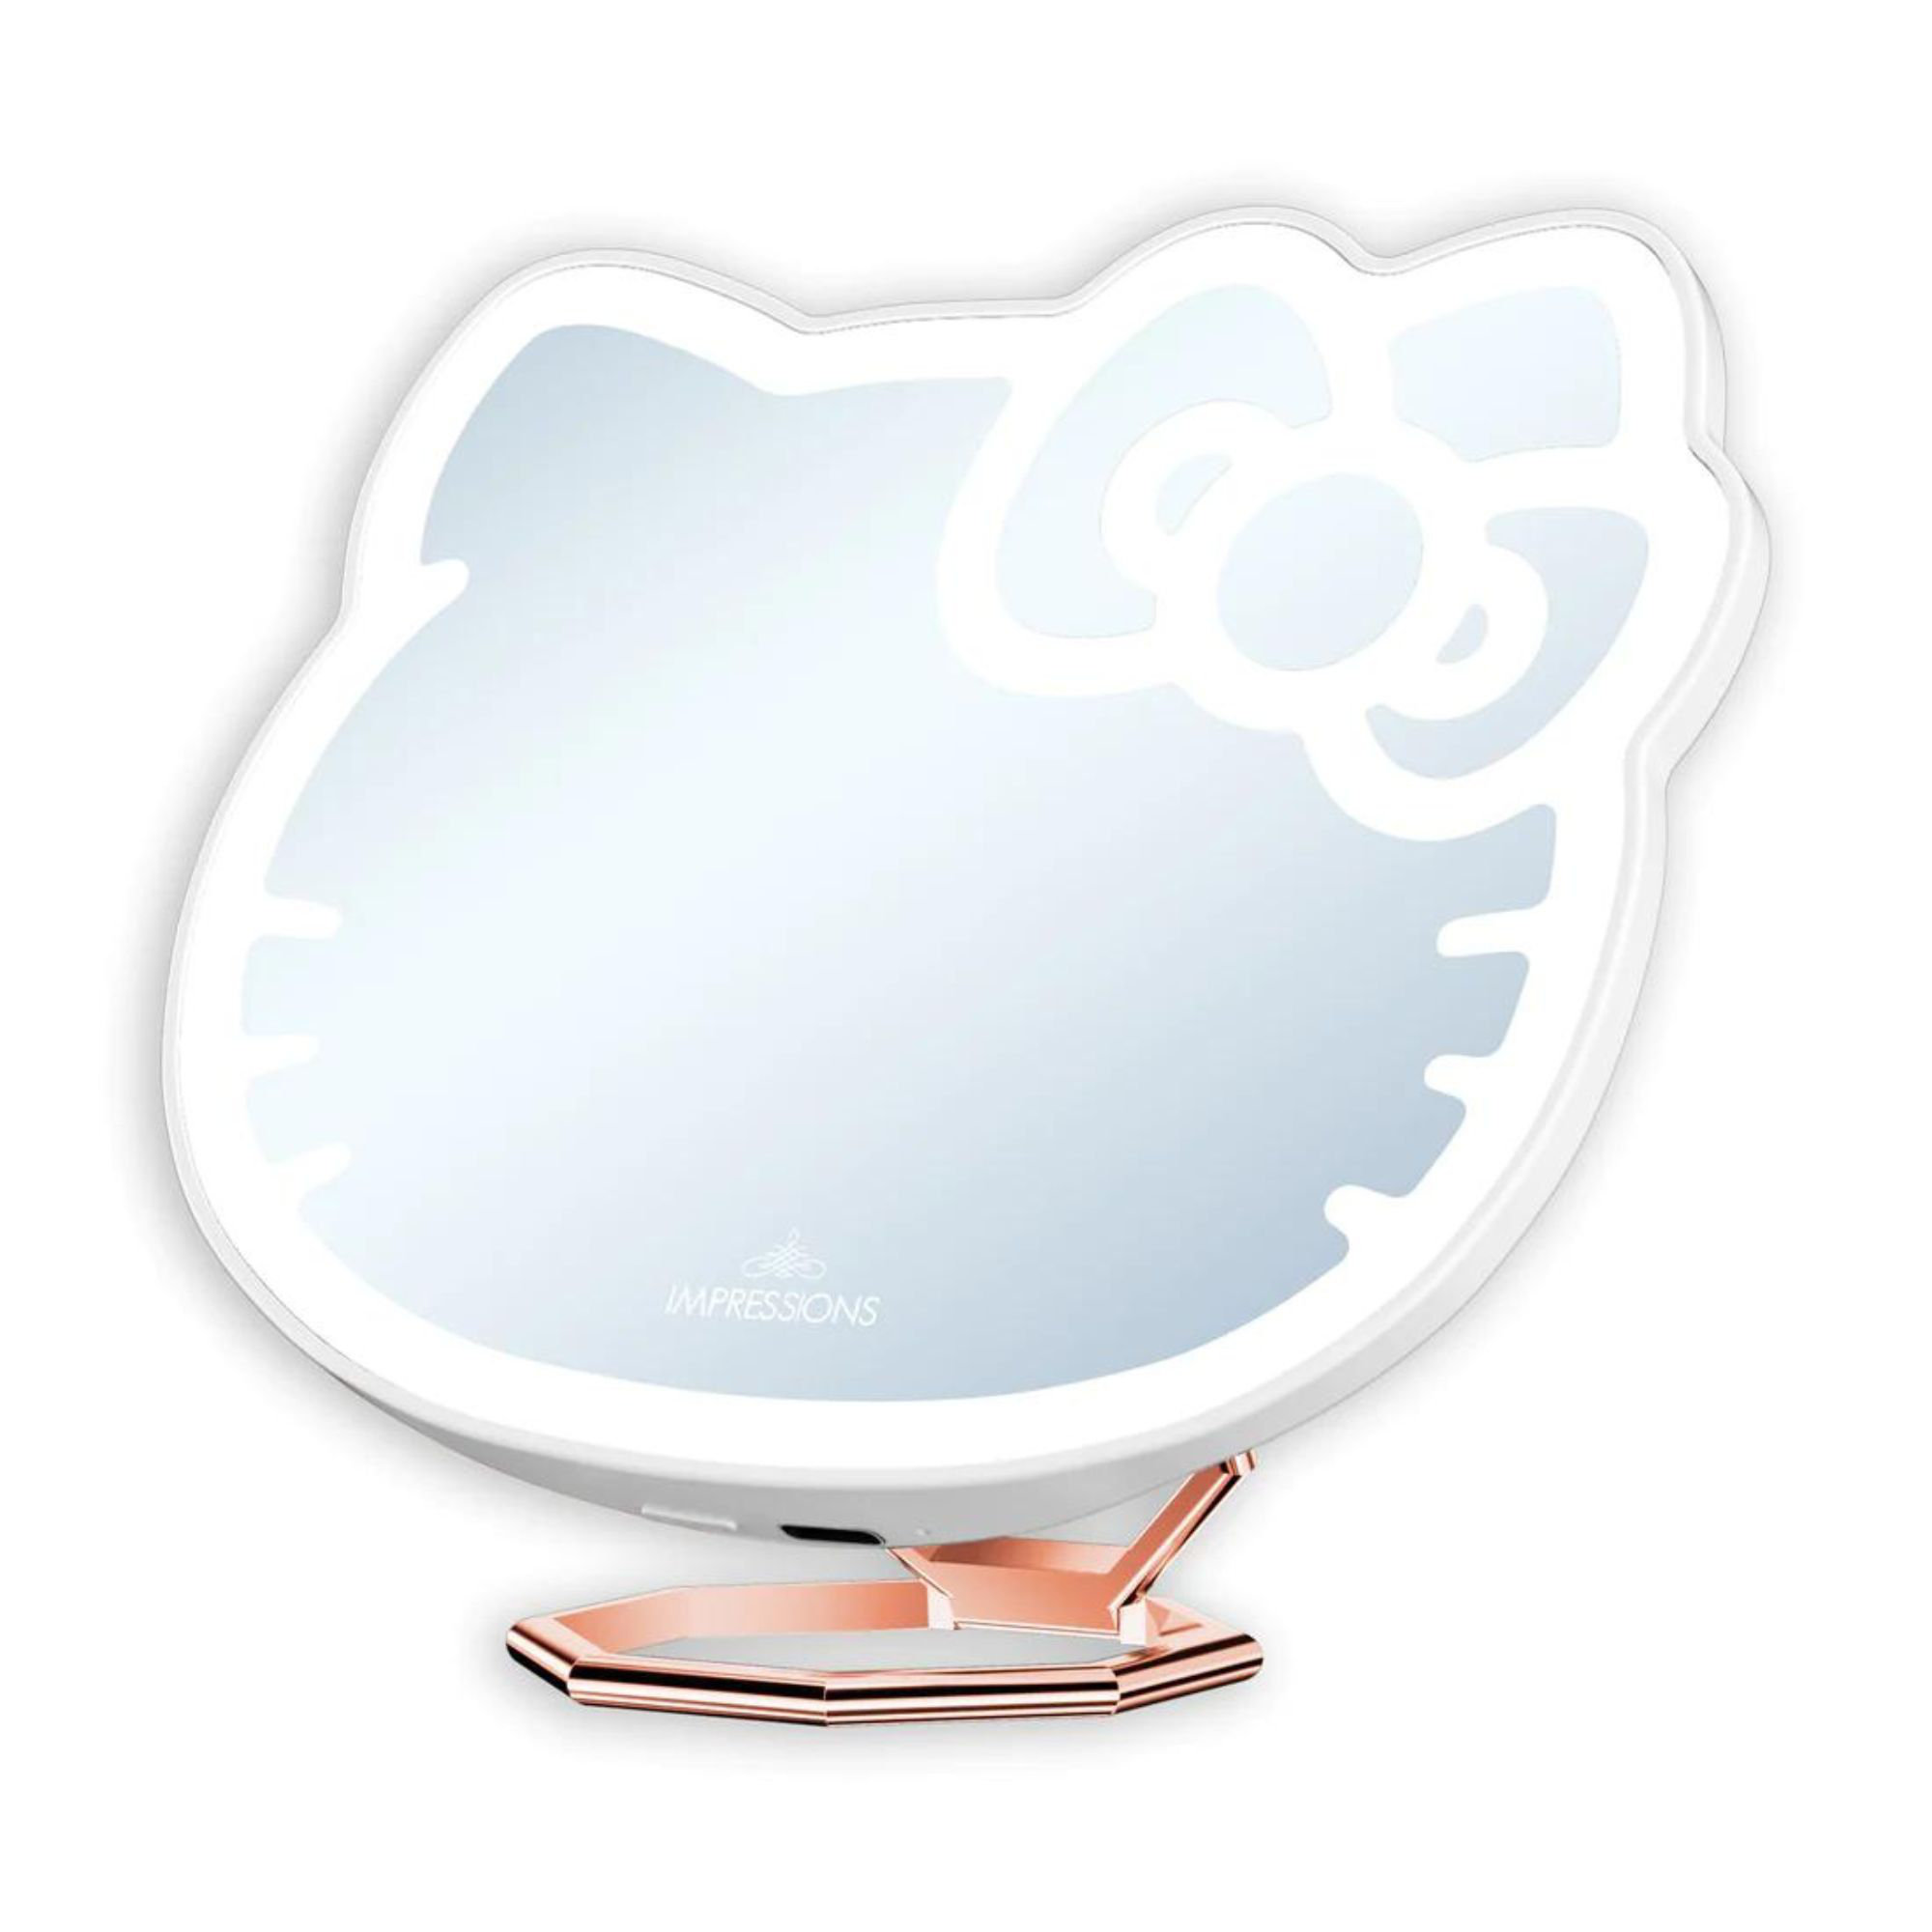 Hello Kitty for Impressions Vanity Compact Mirror